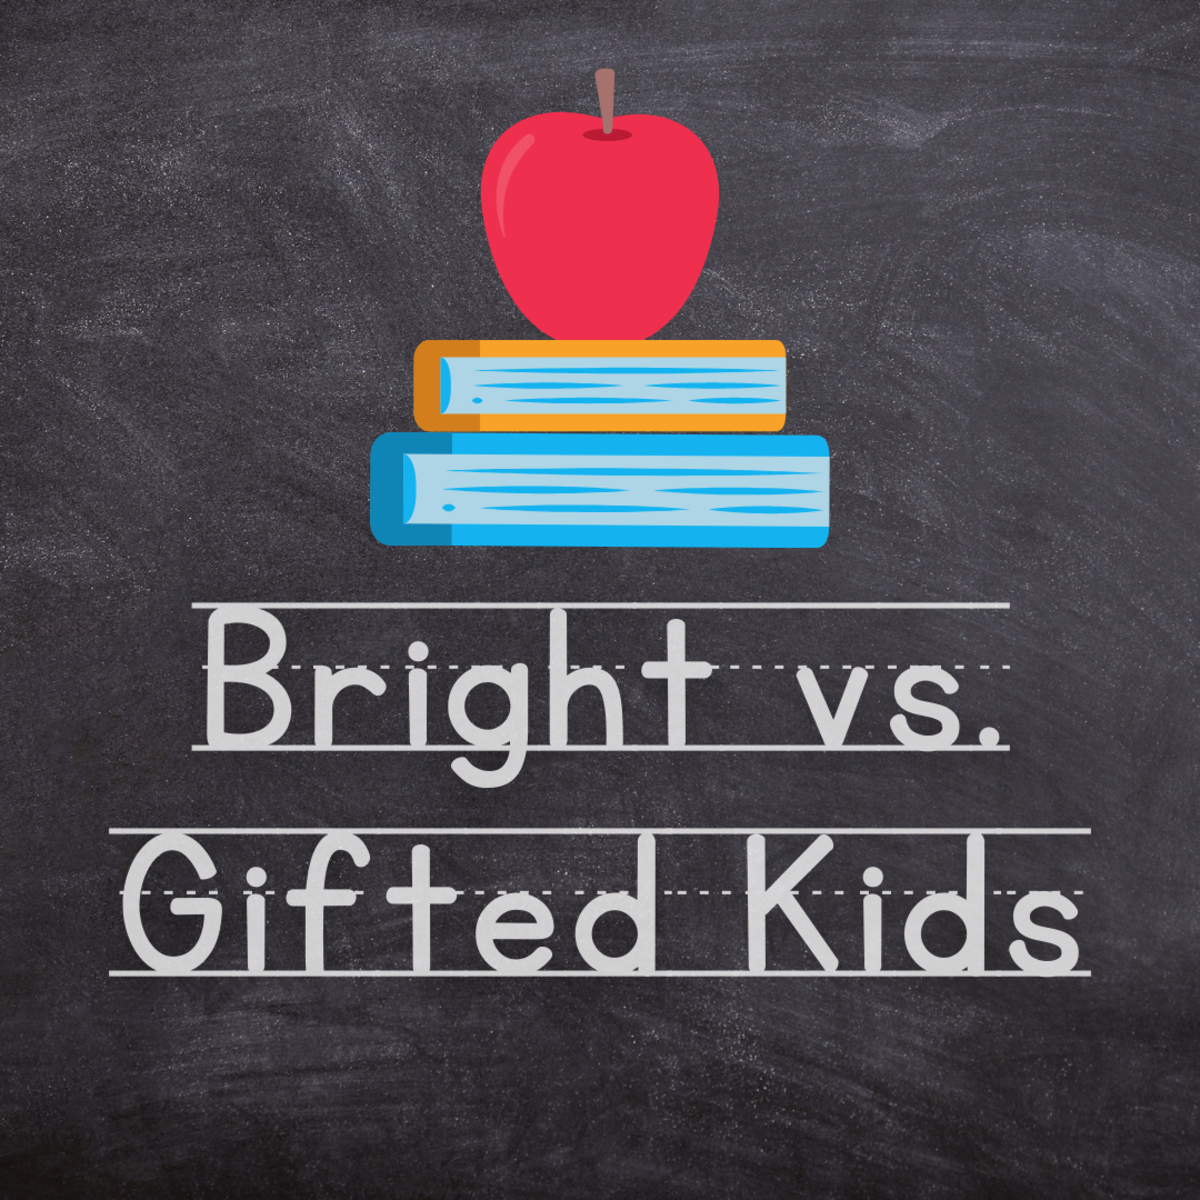 What's the difference between bright and gifted kids?